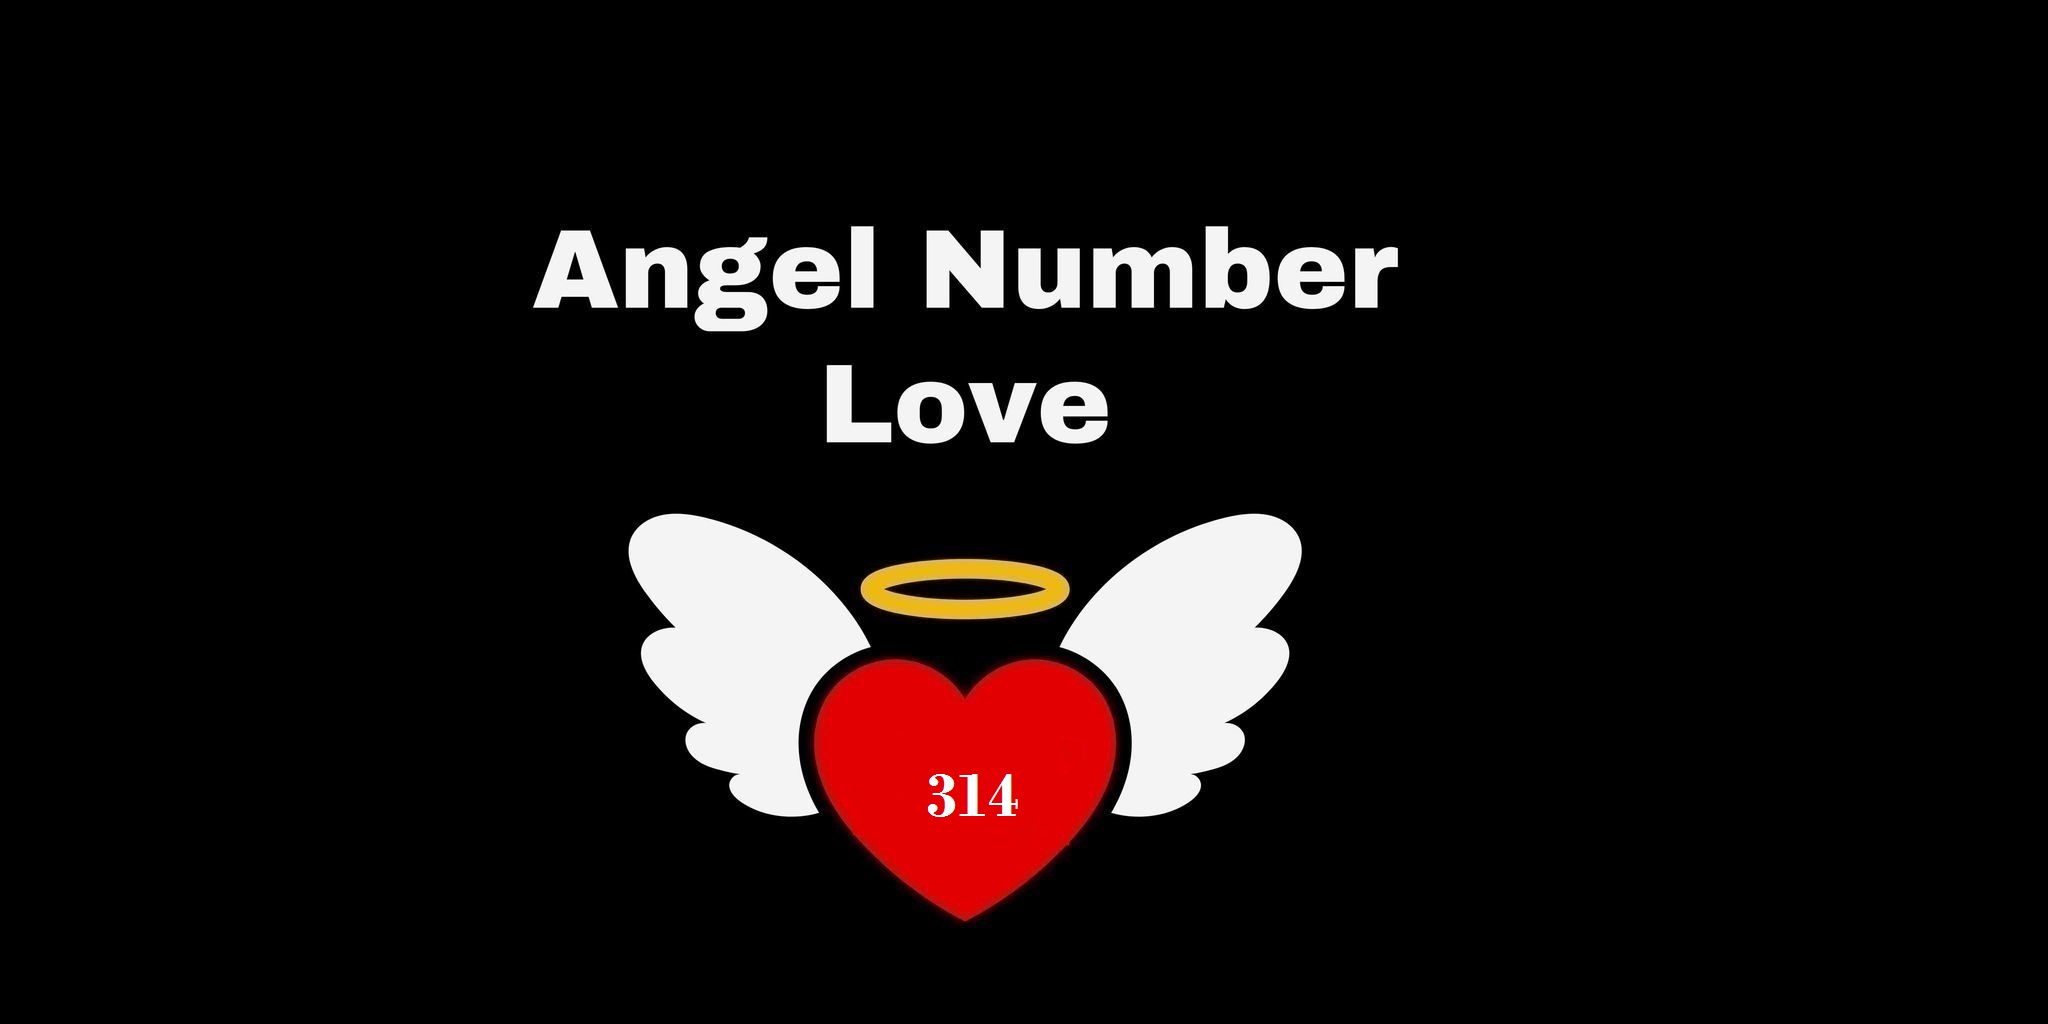 314 Angel Number Meaning In Love